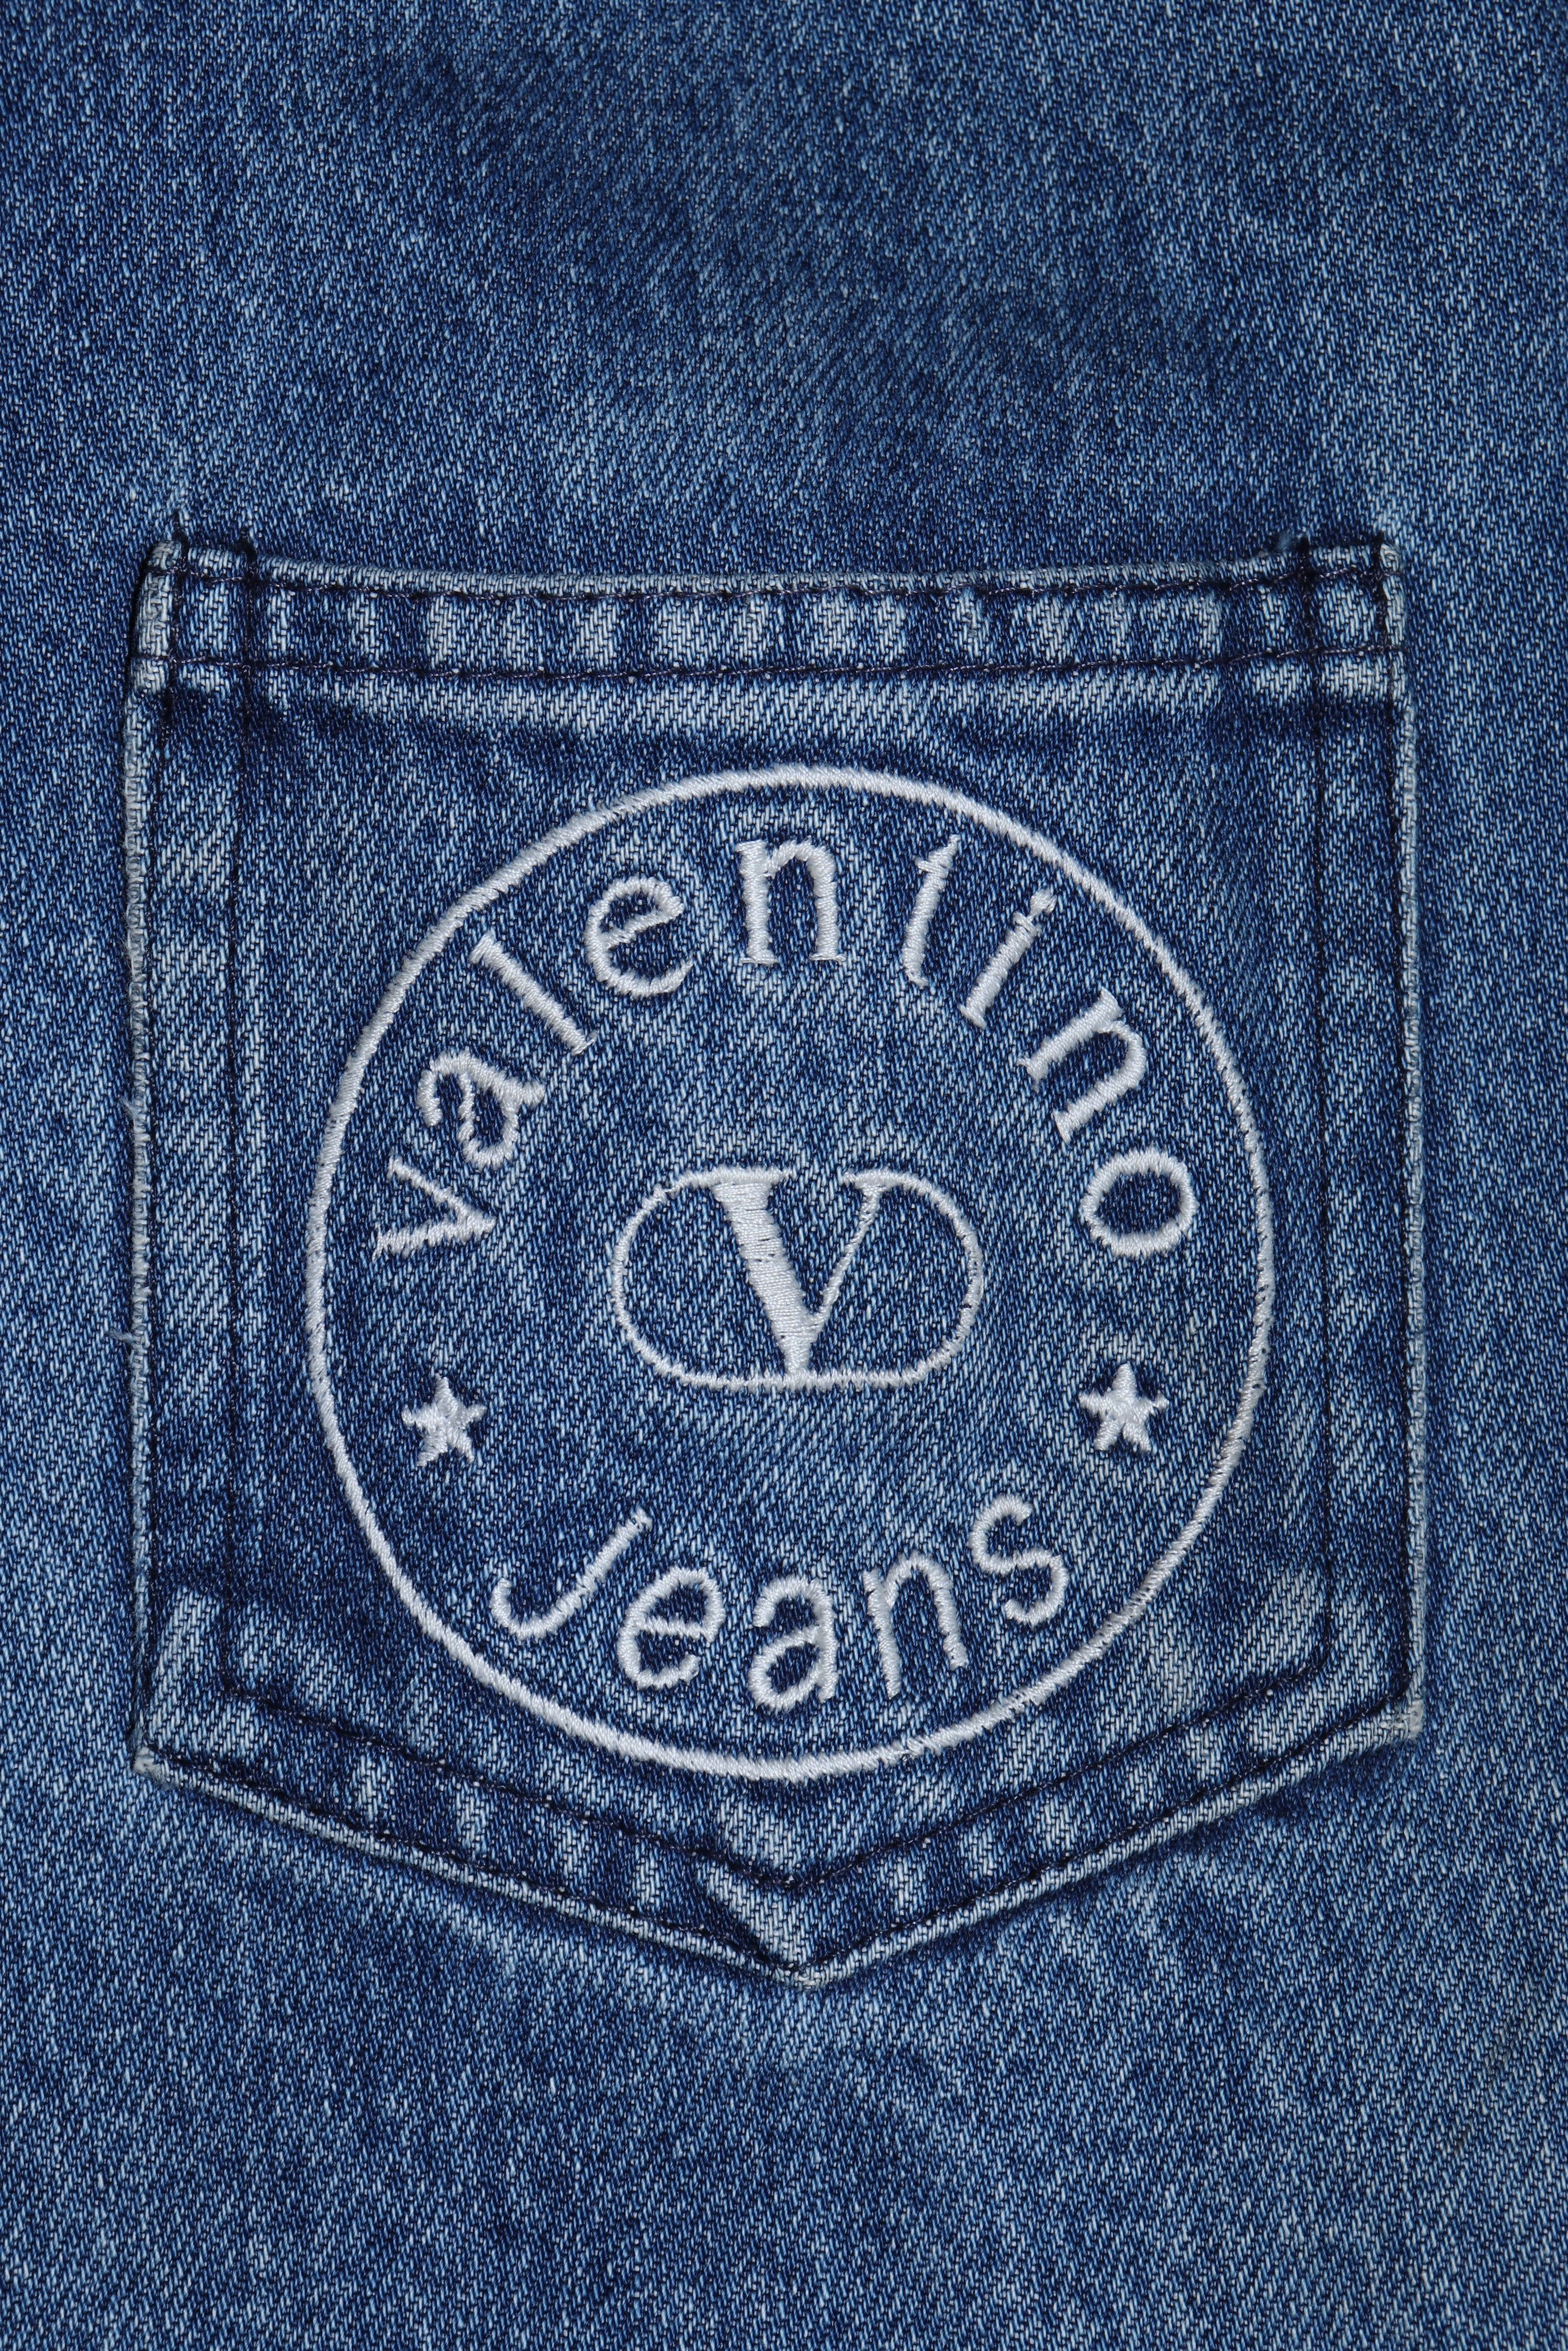 Valentino Jeans Embroidered Logo Hooded Denim Duffle Coat